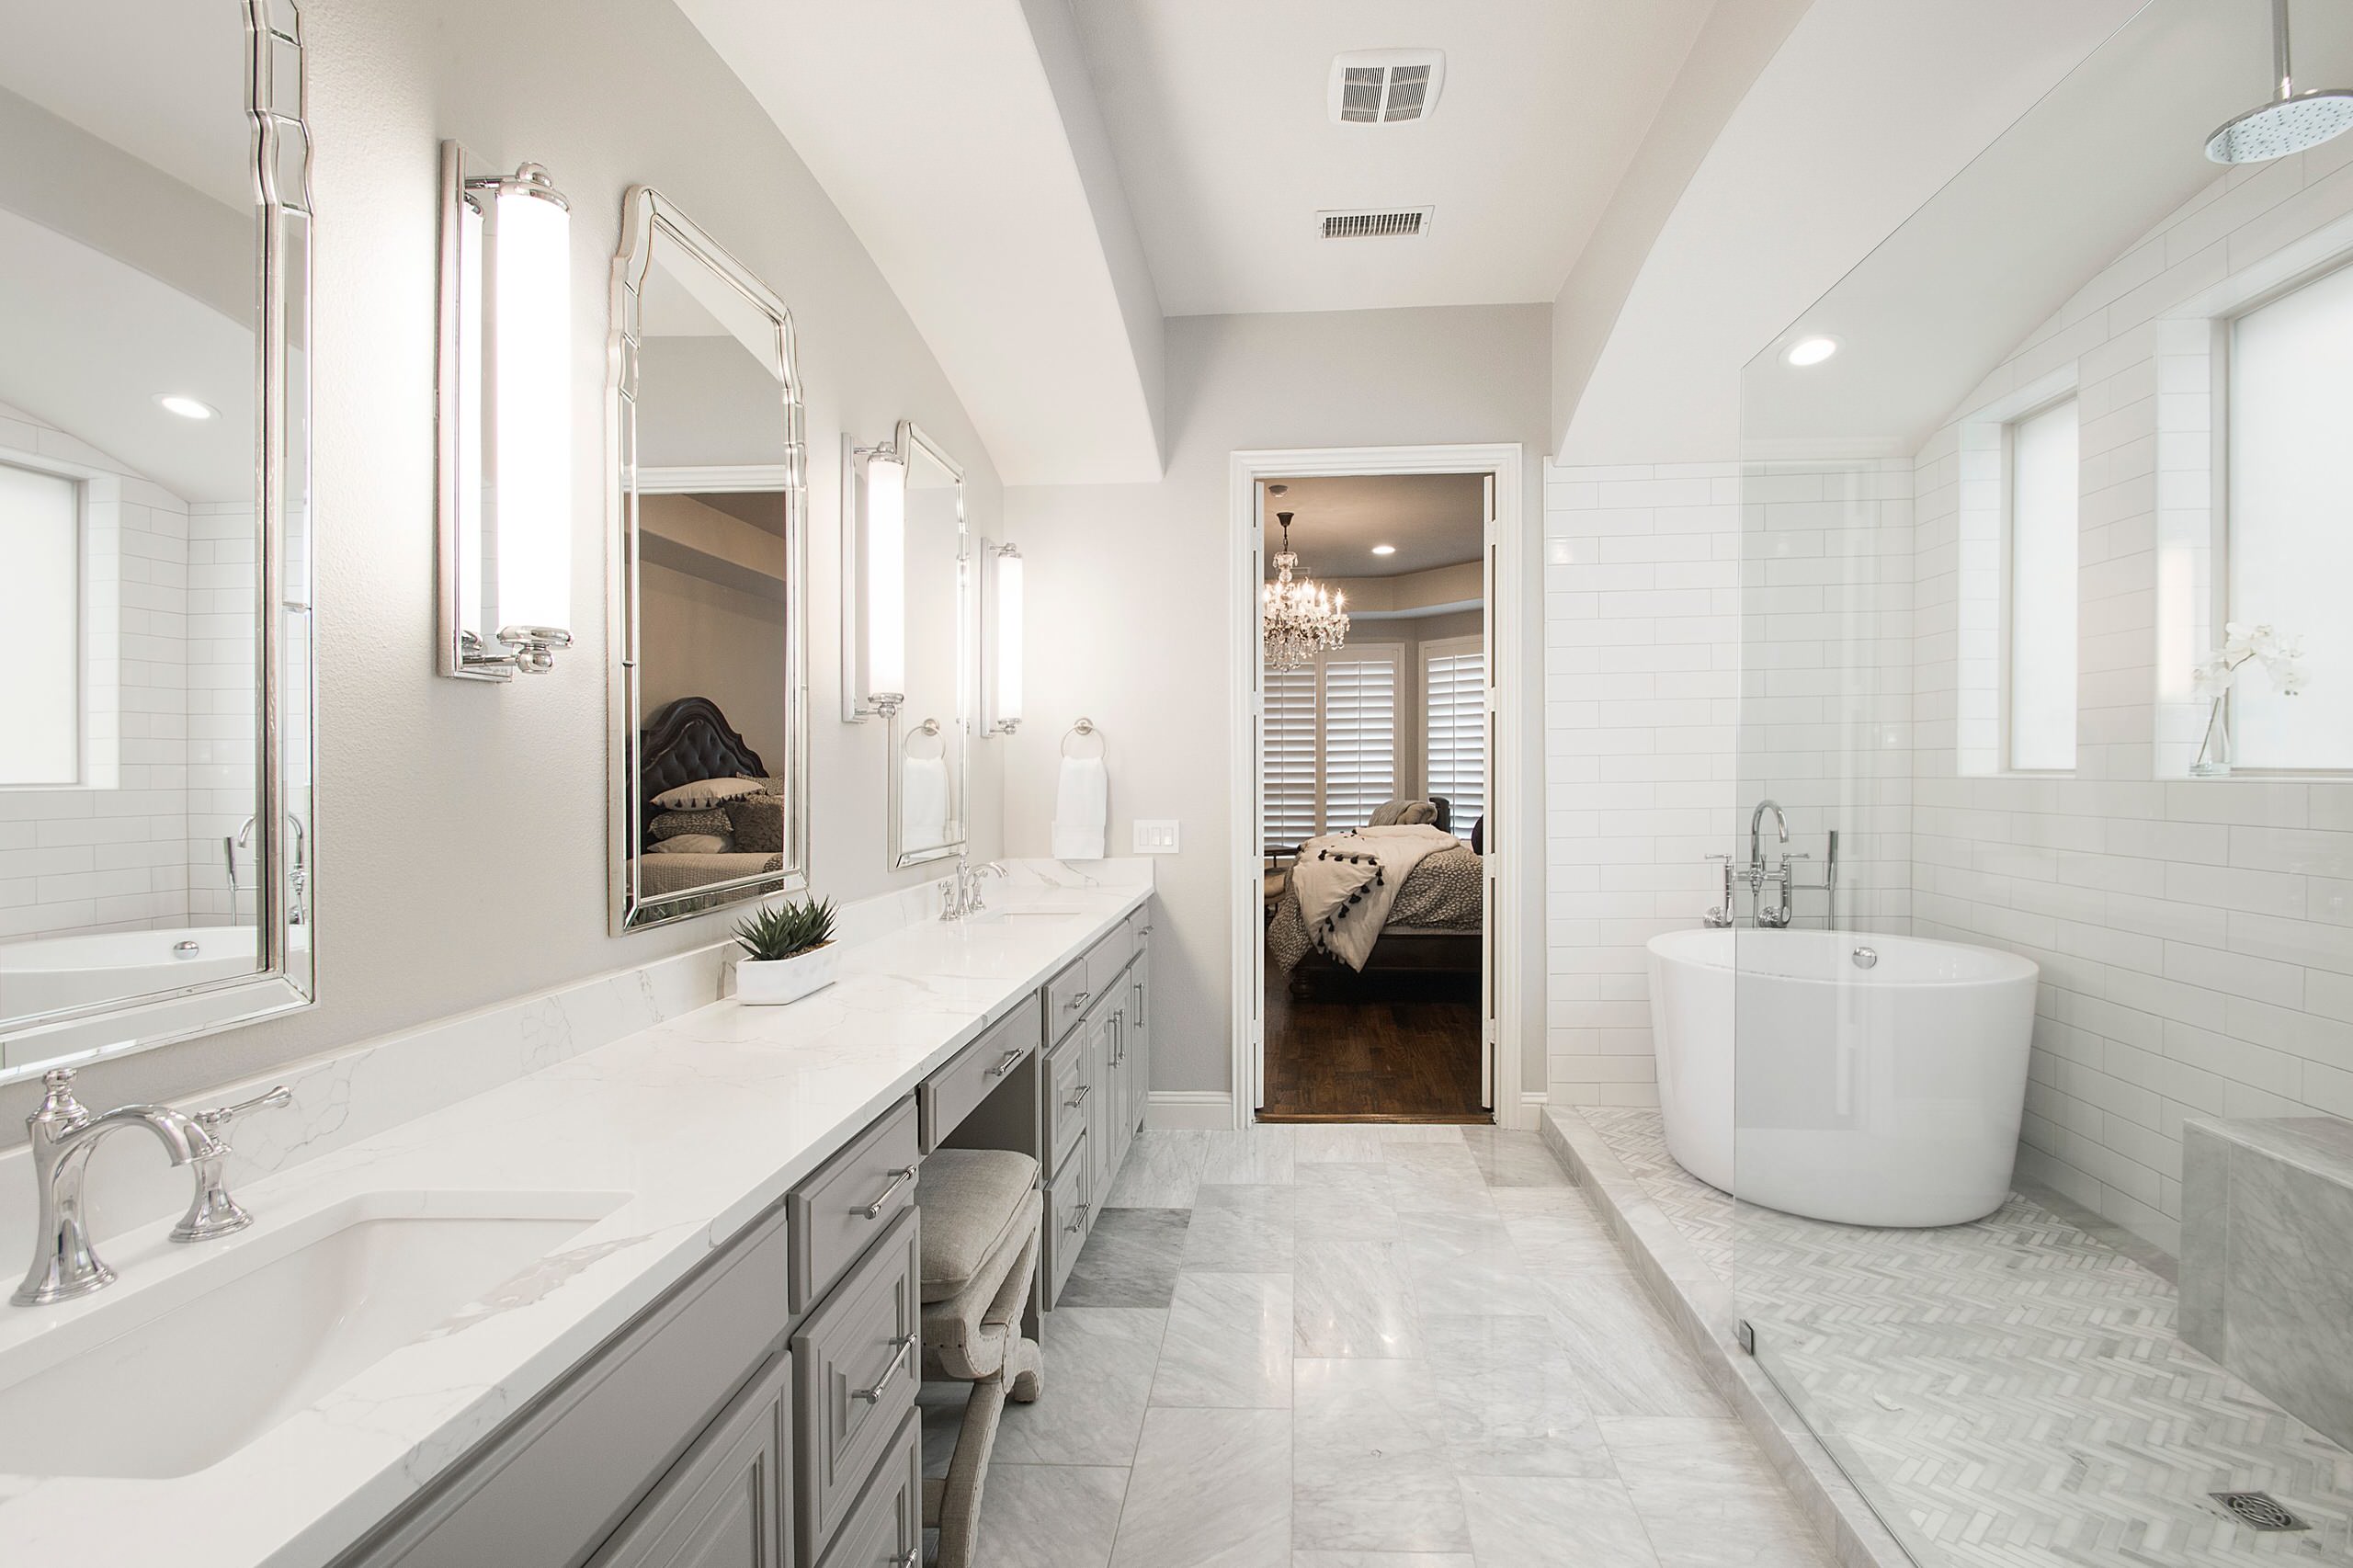 Best Bathroom Remodel 35 000 50, Can You Remodel A Bathroom For 50000